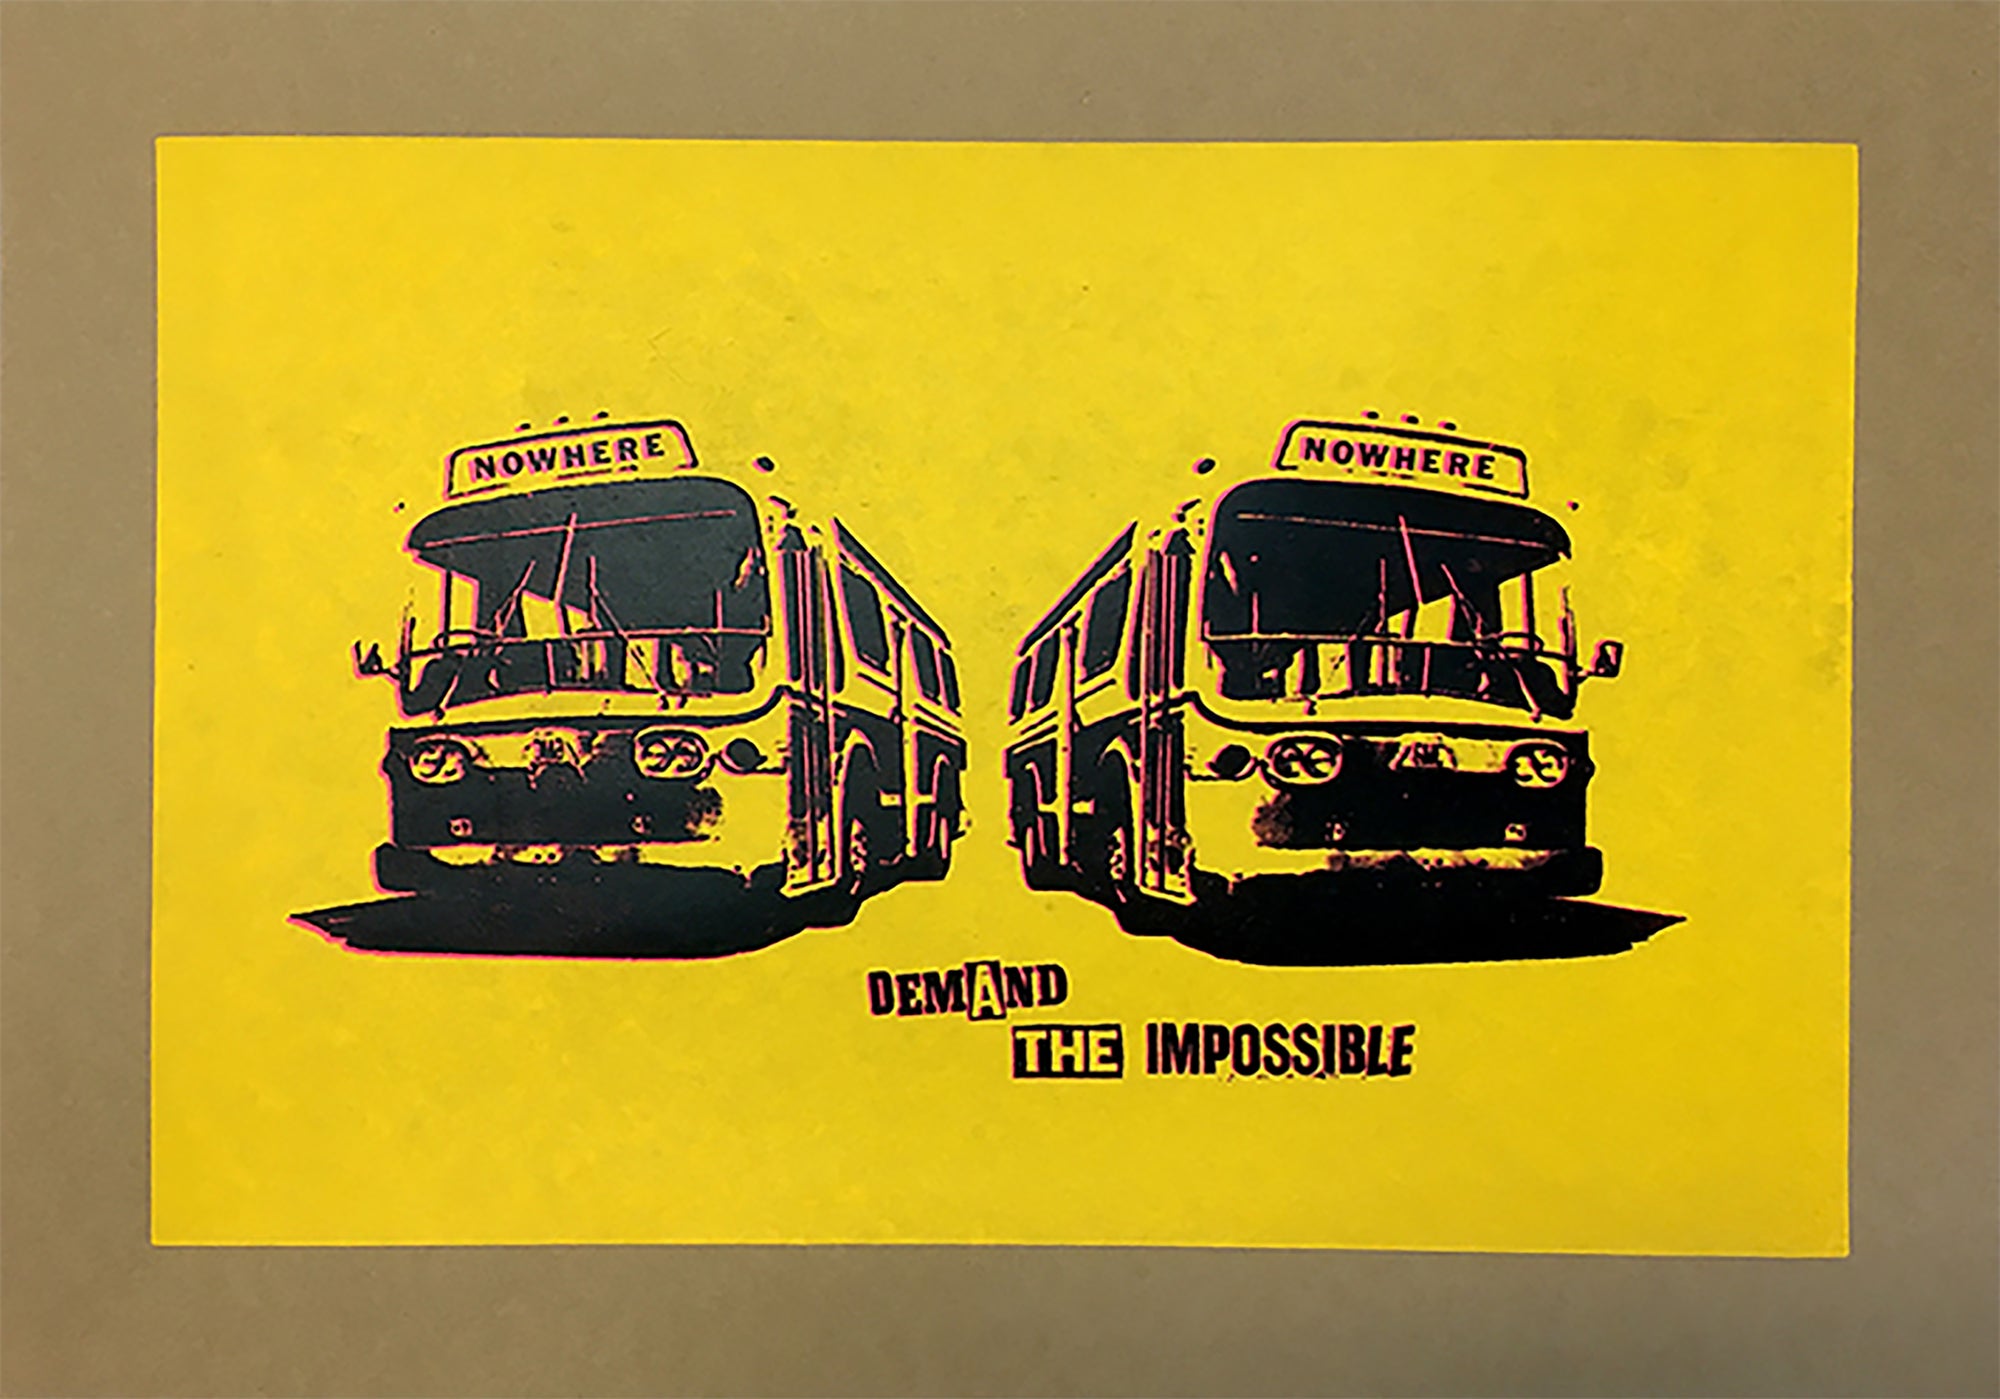 Jamie Reid - Demand The Impossible (Nowhere Buses - Yellow)